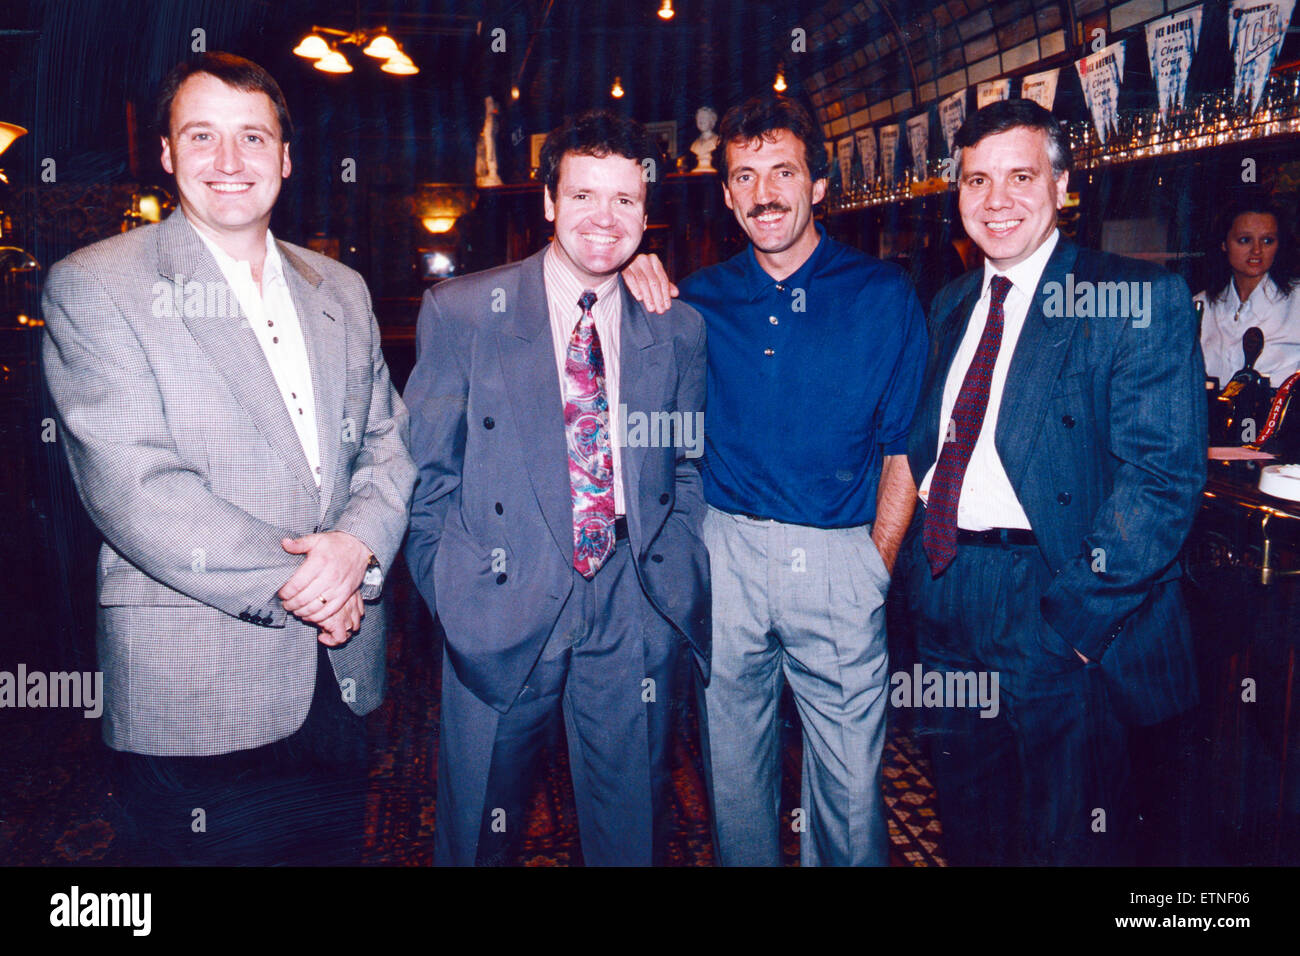 The first Echo Higsons League Fans Forum takes place at the Royal Oak Pub in Muirhead Avenue, West Derby, Liverpool, 24th October 1994. Panel of guests, (left to right) compere Willie Miller, former Everton player John Bailey, former Liverpool defender Alan Kennedy and Echo Sports Editor Ken Rogers. Stock Photo